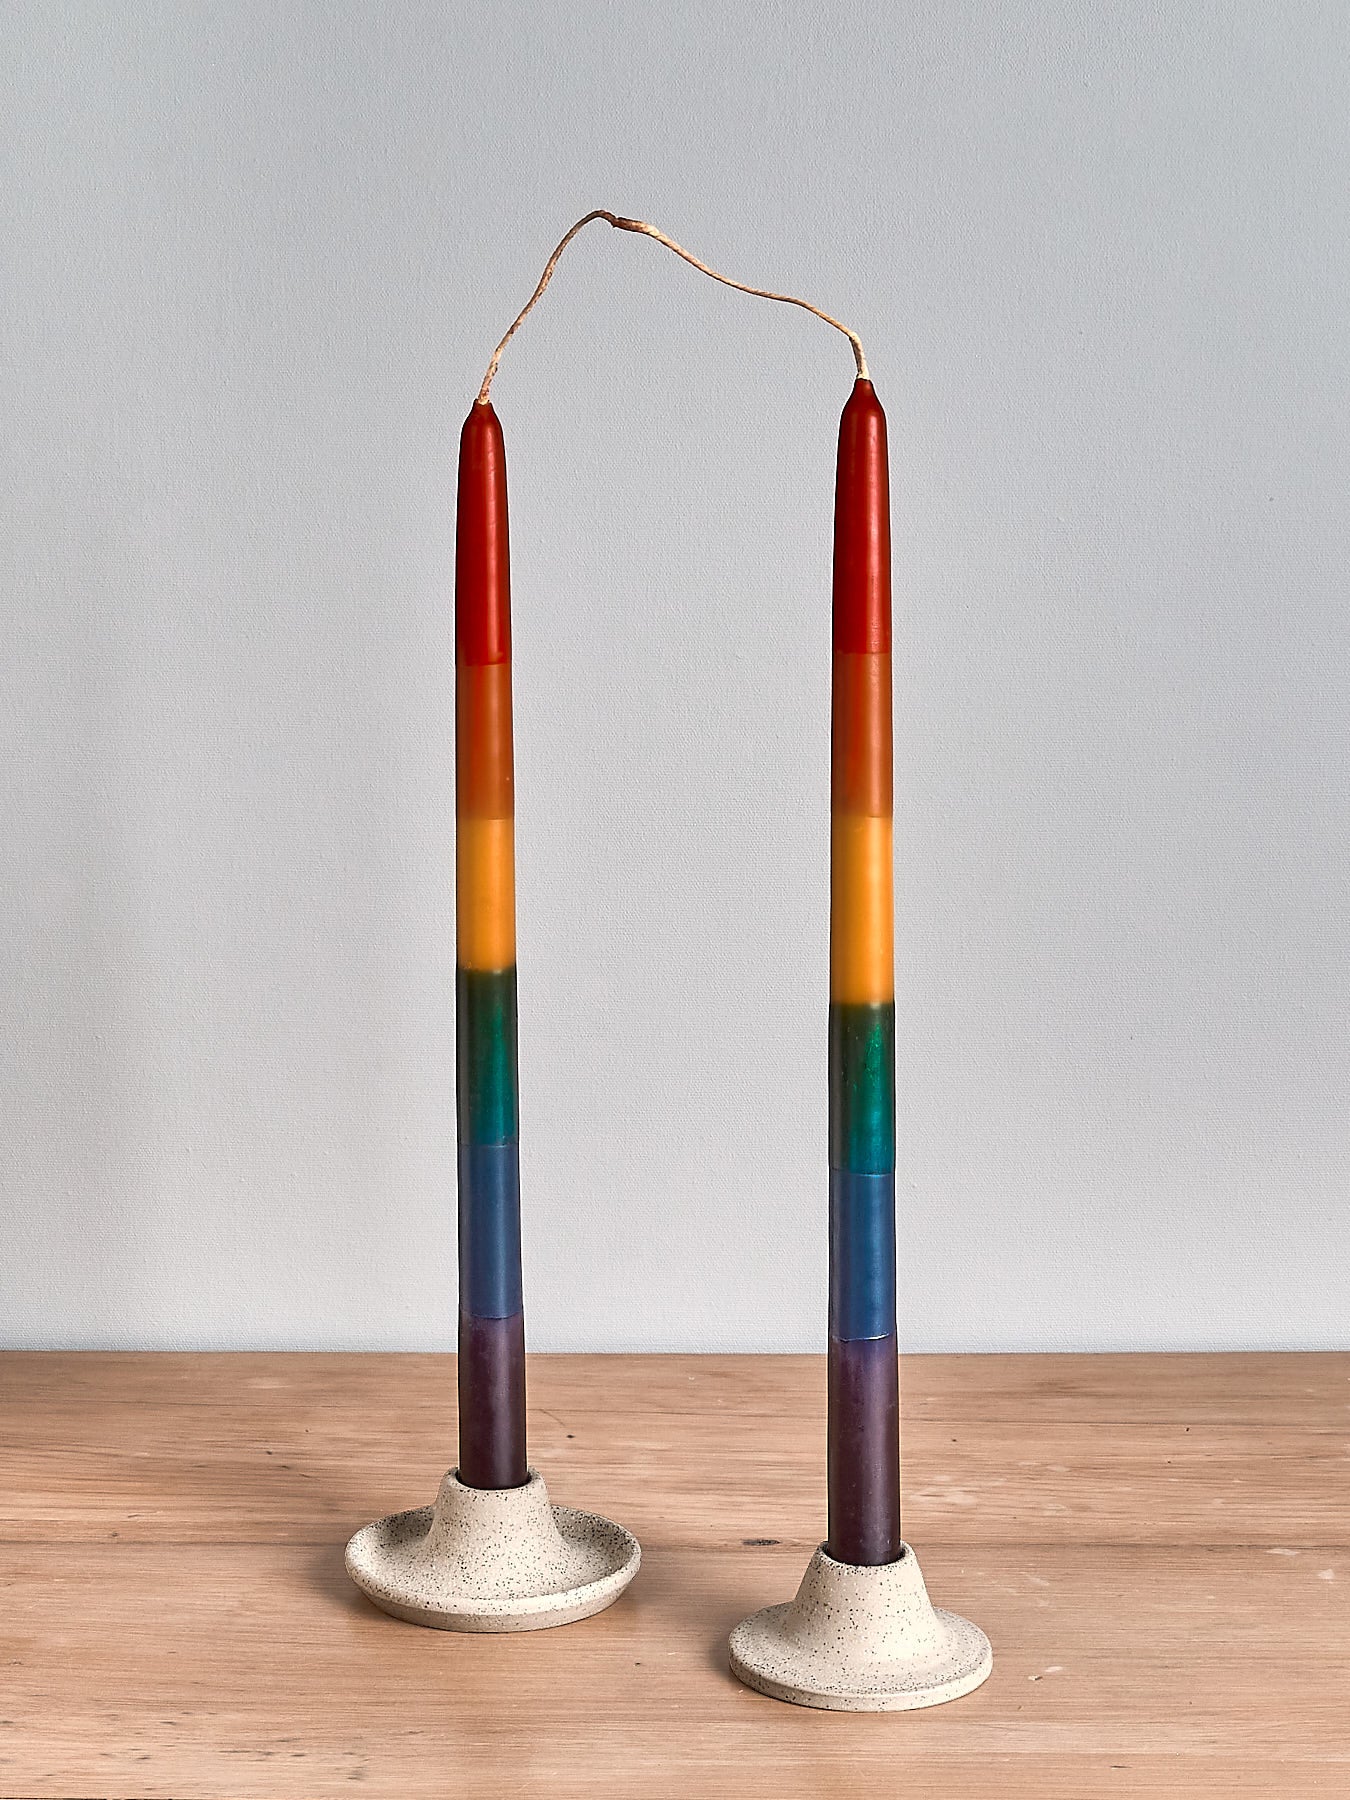 Two Dinner Candle Sets - Rainbow by Hohepa Candles on a wooden table.